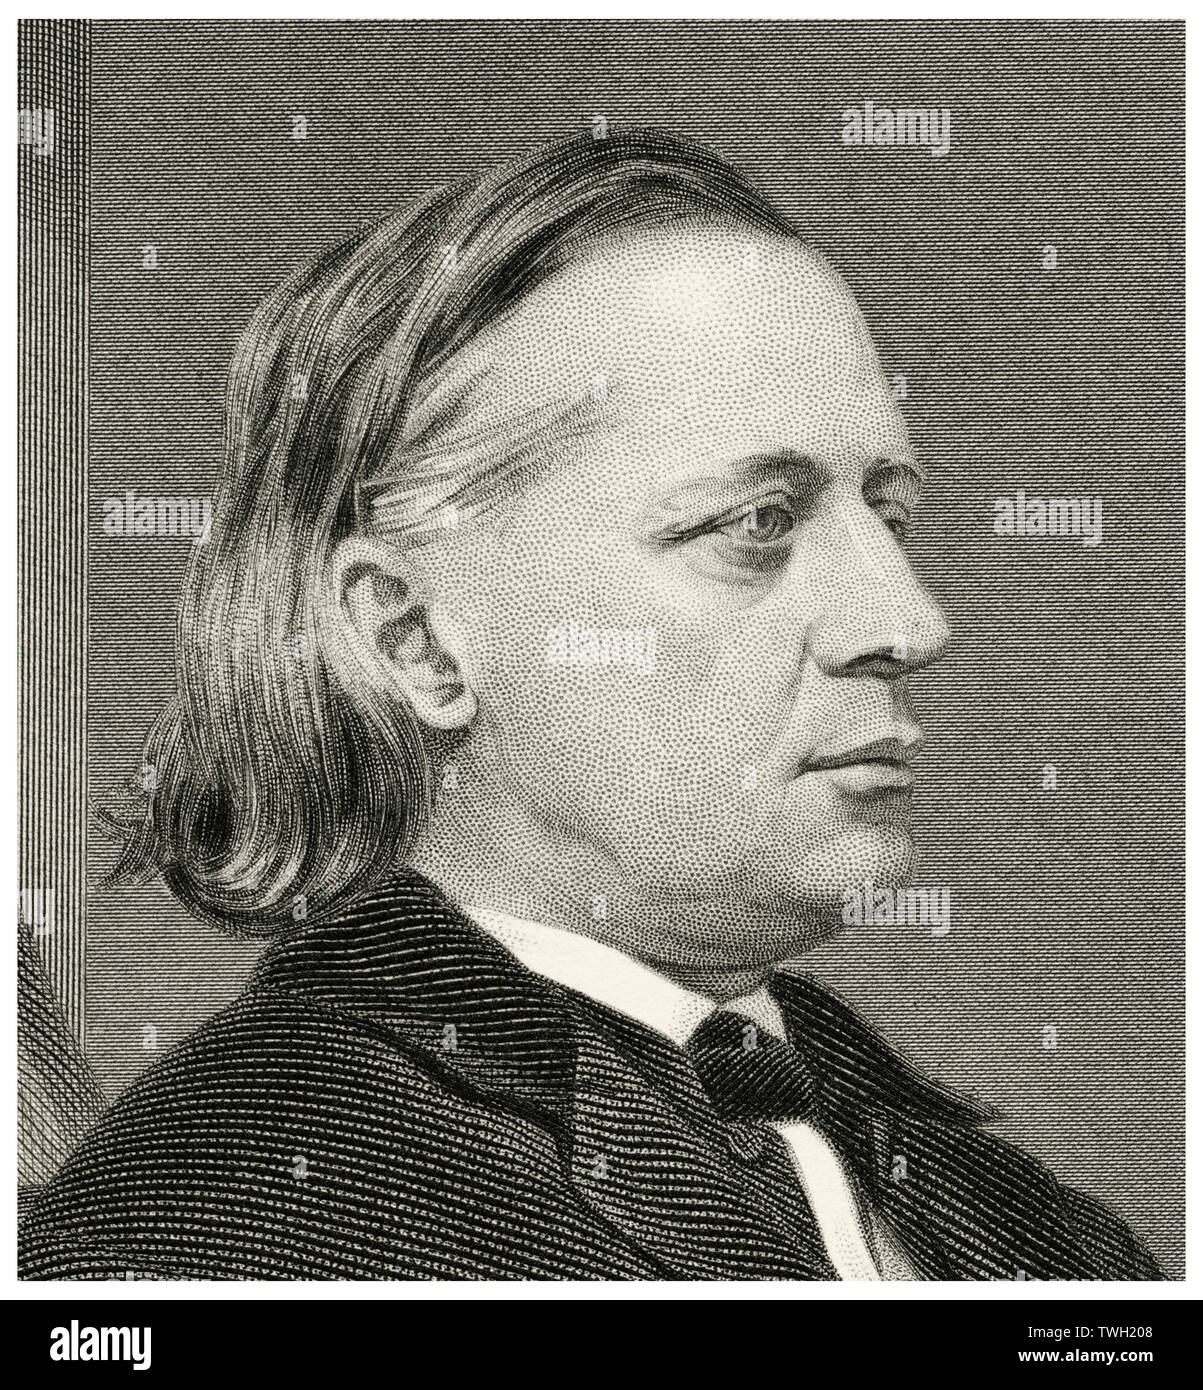 Henry Ward Beecher (1813-87), American Congregational Minister, Orator, Abolitionist and Social Reformer, Head and Shoulders Portrait, Steel Engraving, Portrait Gallery of Eminent Men and Women of Europe and America by Evert A. Duyckinck, Published by Henry J. Johnson, Johnson, Wilson & Company, New York, 1873 Stock Photo